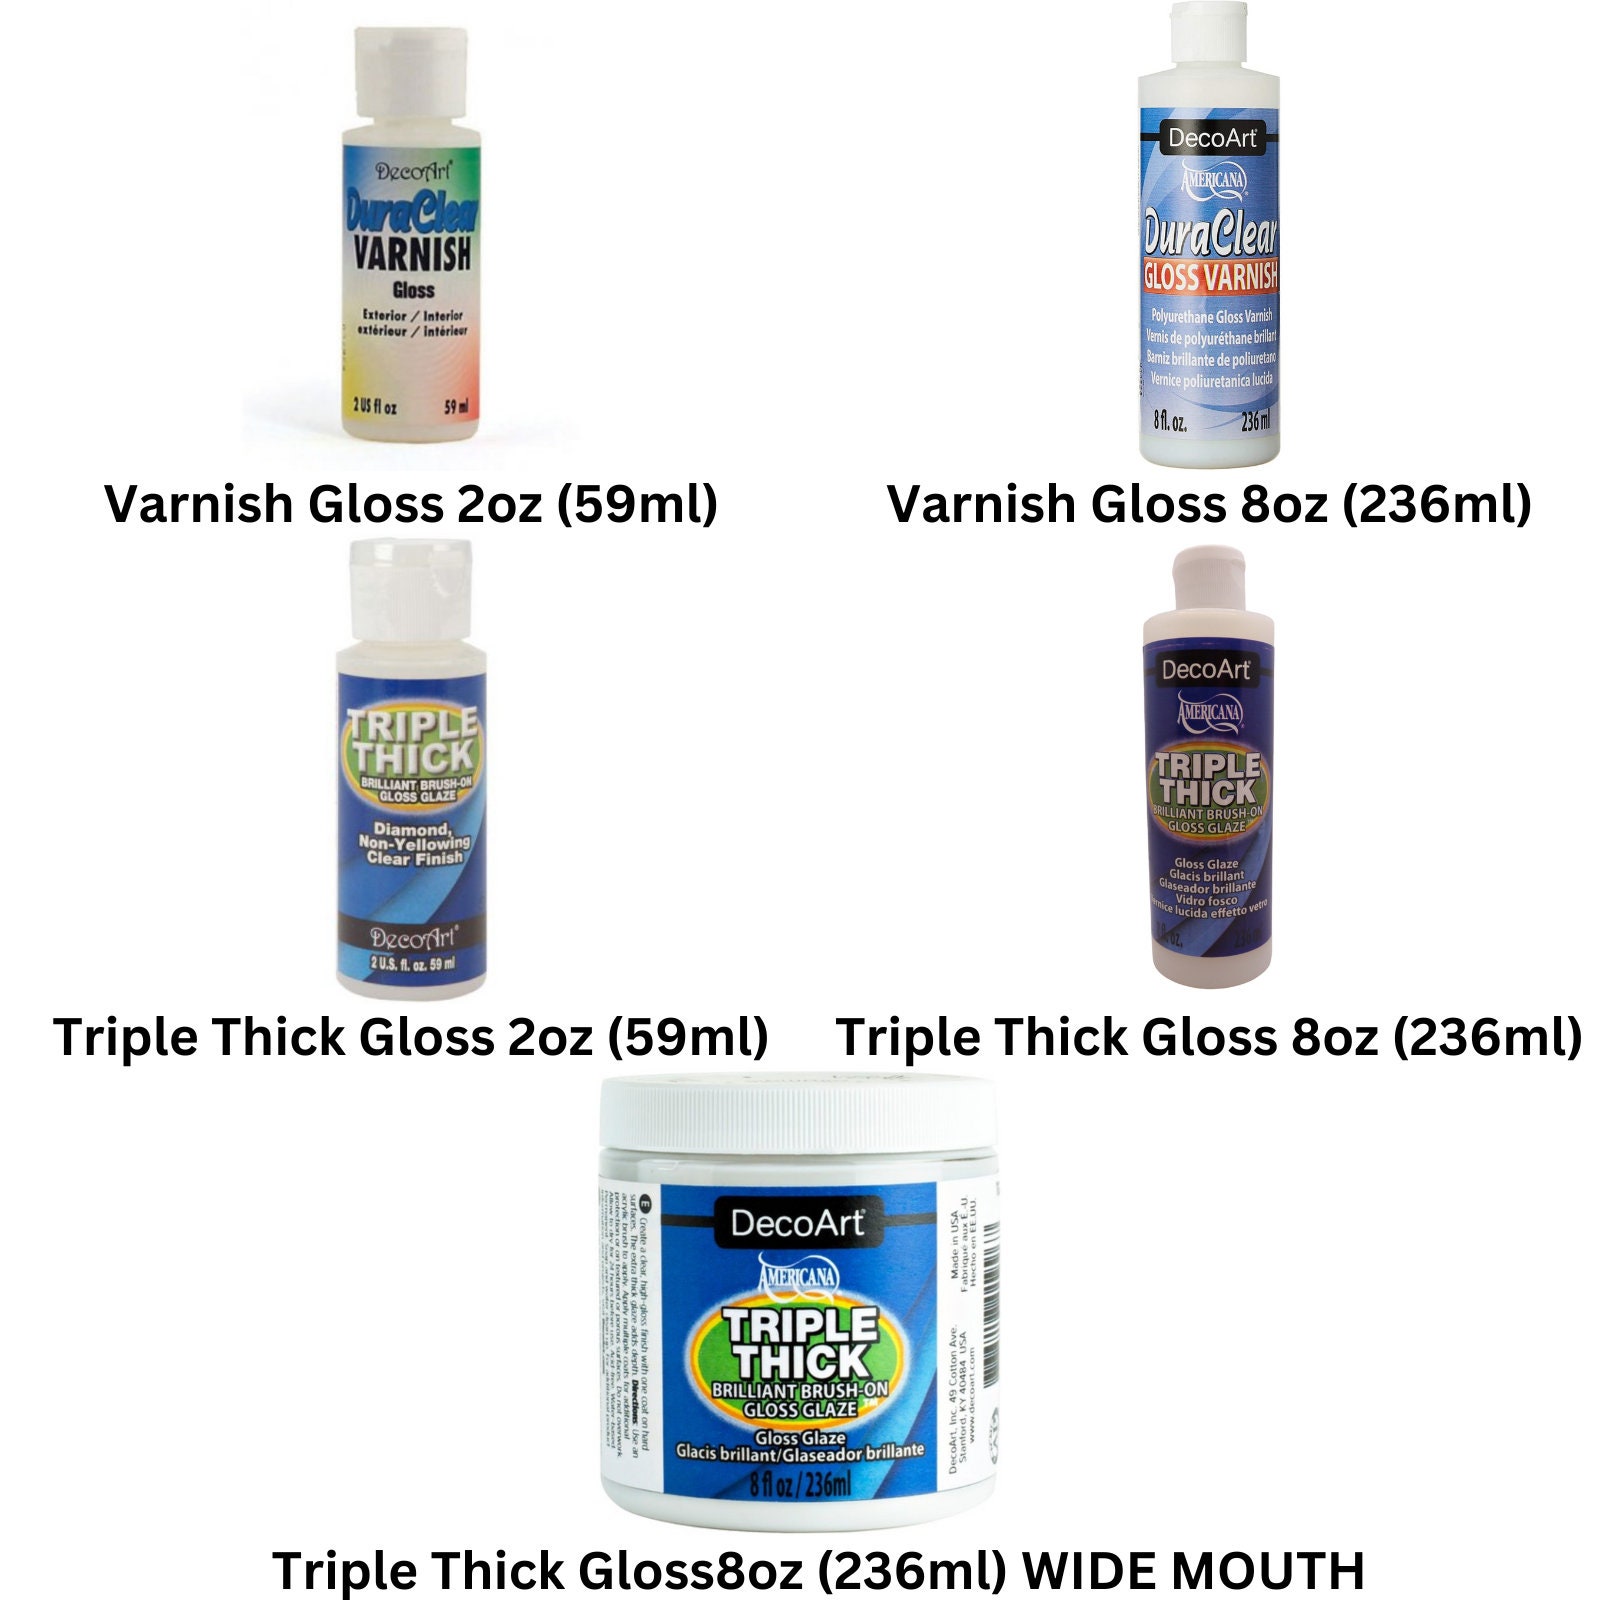 Varnish reviews for Decoart Triple Thick Brush-on Gloss Glaze and